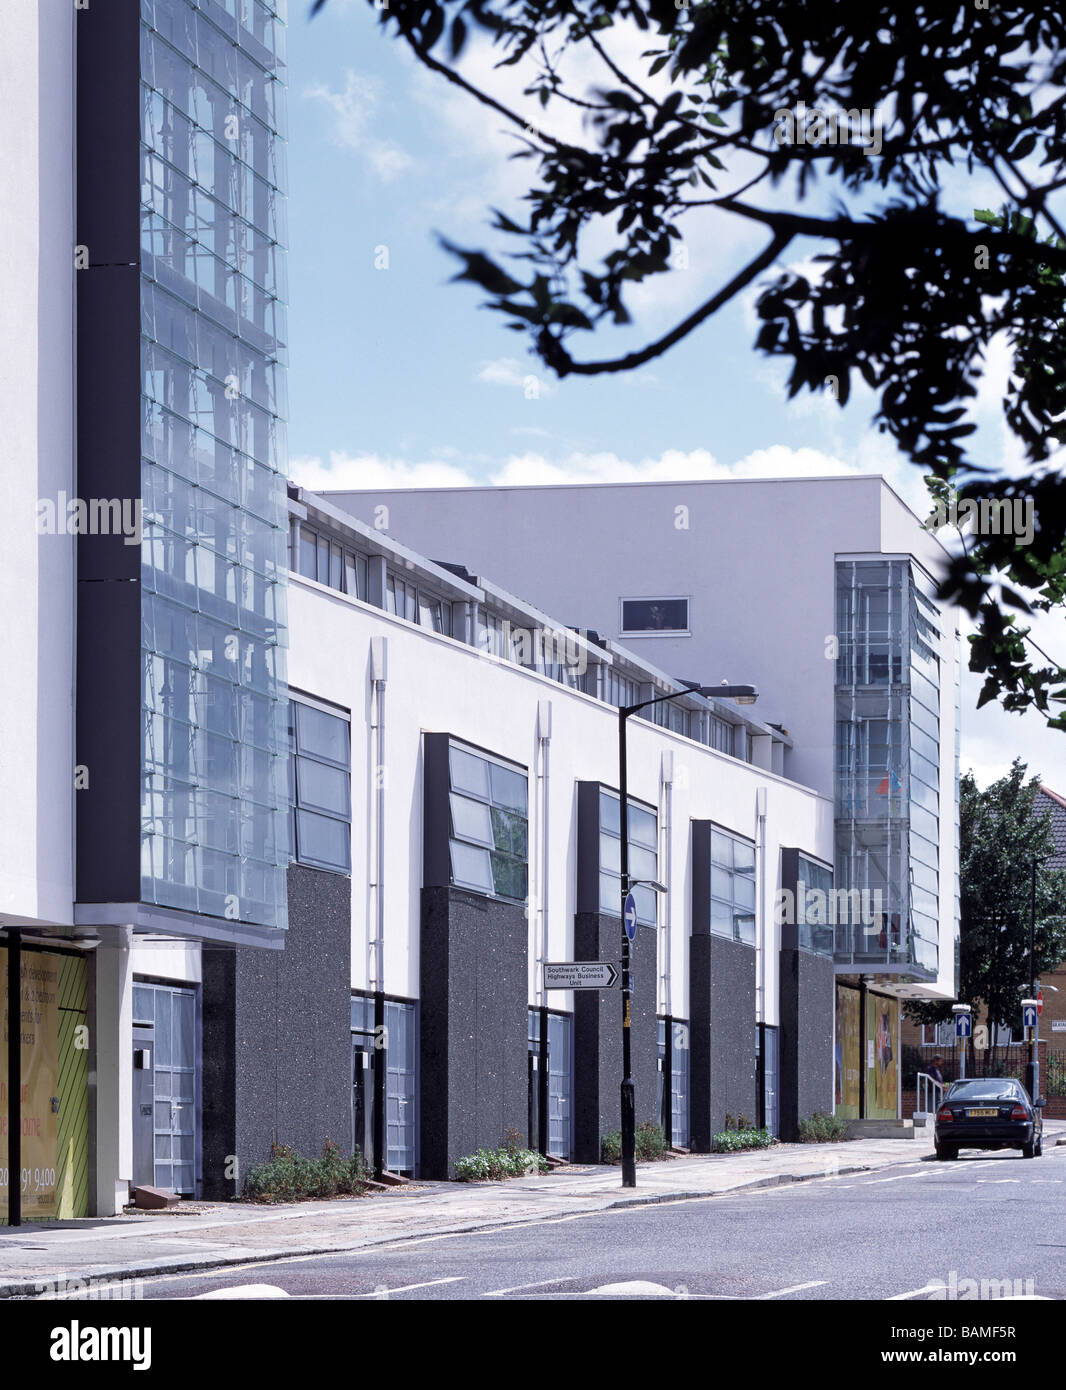 Consort Road Housing, London, United Kingdom, Walter Menteth Architects, Consort road housing exterior view. Stock Photo